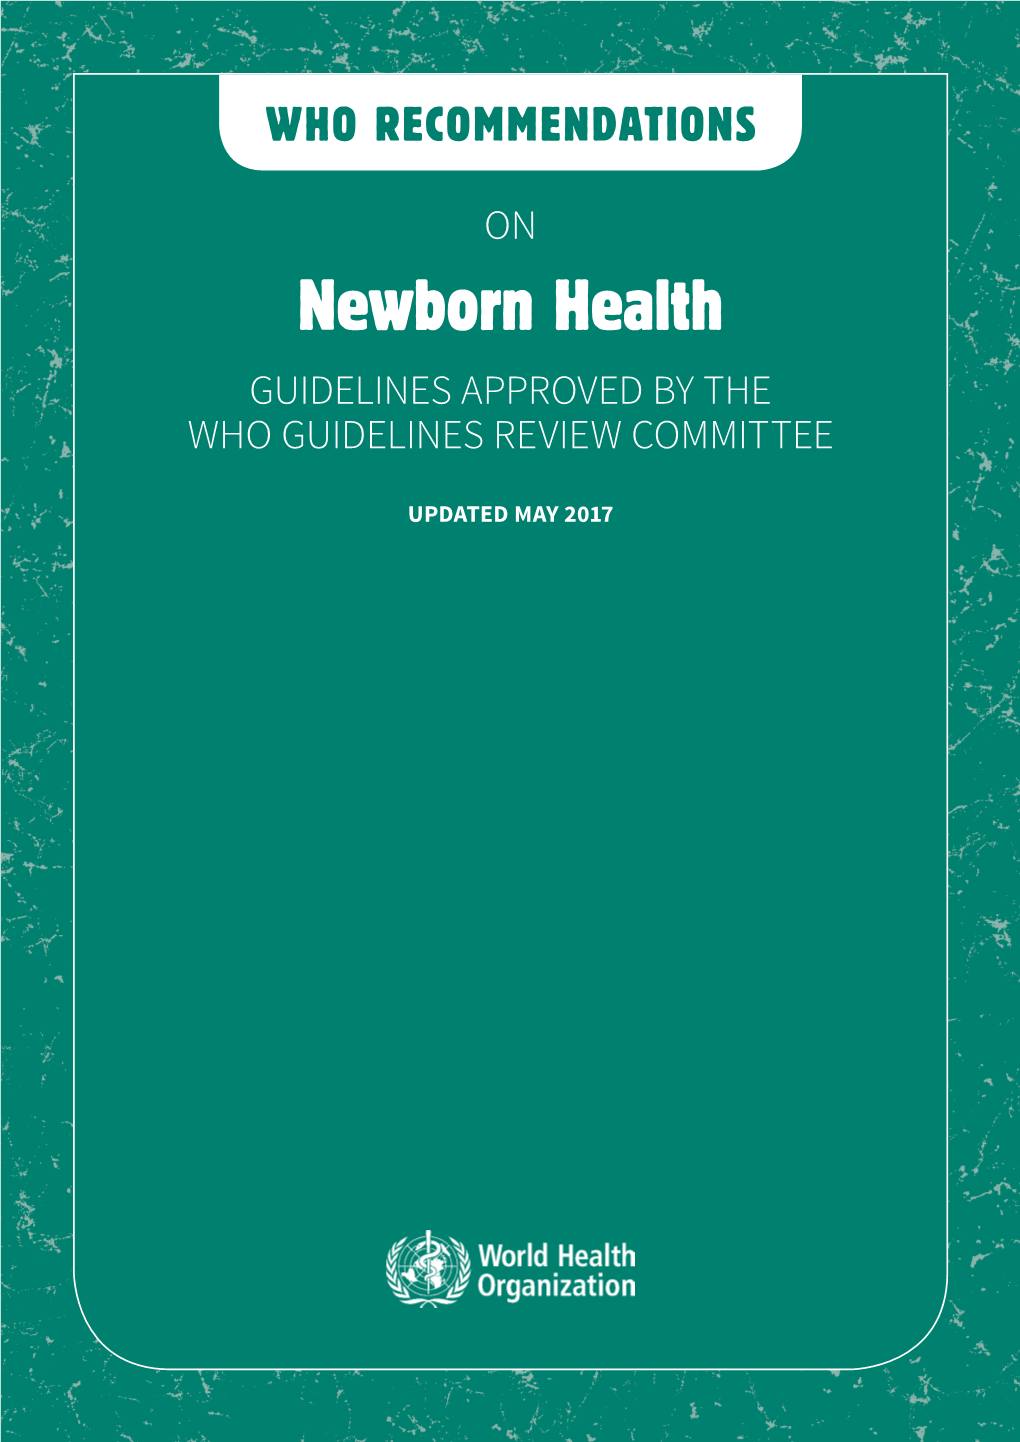 WHO Recommendations on Newborn Health: Guidelines Approved by the WHO Guidelines Review Committee